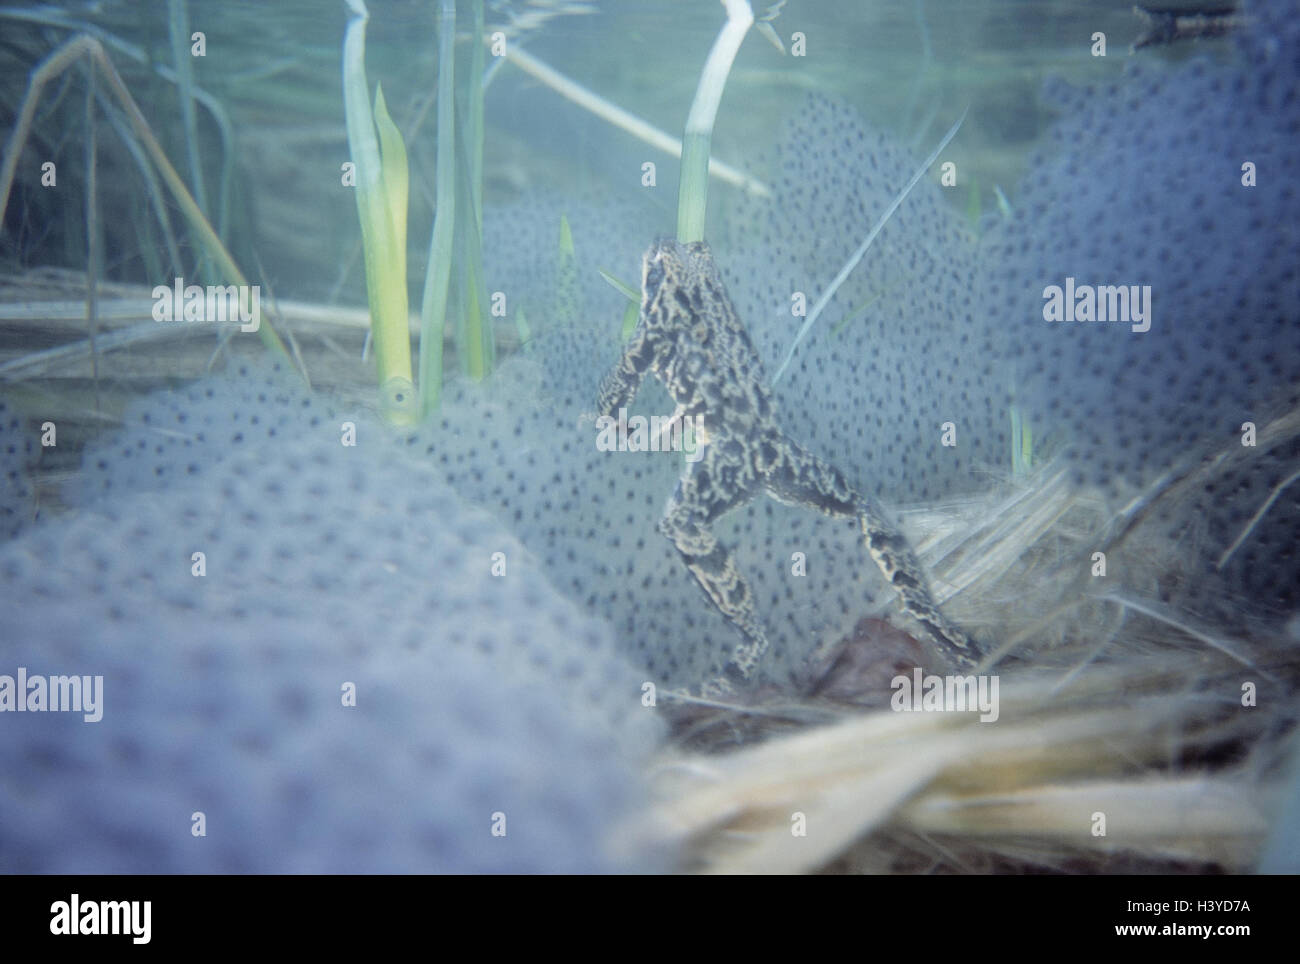 Grass frog, Rana temporaria, spawning season, egg-laying, pond, underwater recording, under water, animals, amphibians, Amphibians, frog Amphibians, Ranidae, frogs, reproduction, increase, spawn, ablaichen, eggs, egg-laying, frog eggs, frogspawn, spawn, s Stock Photo